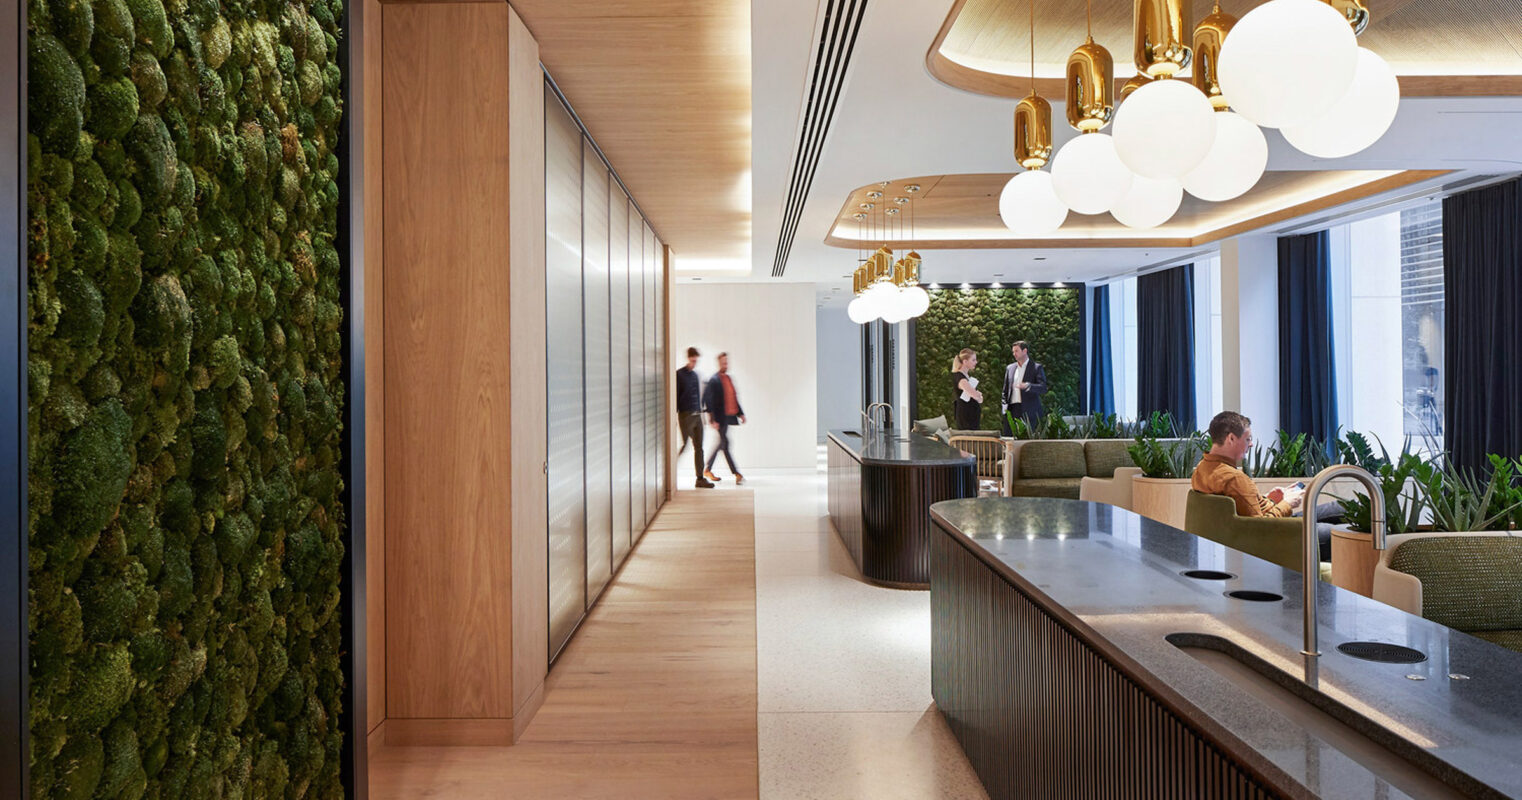 Modern office lobby with moss wall feature, wood paneling, and sleek reception desk. Golden pendant lights contrast with white spherical lamps above tailored seating areas.